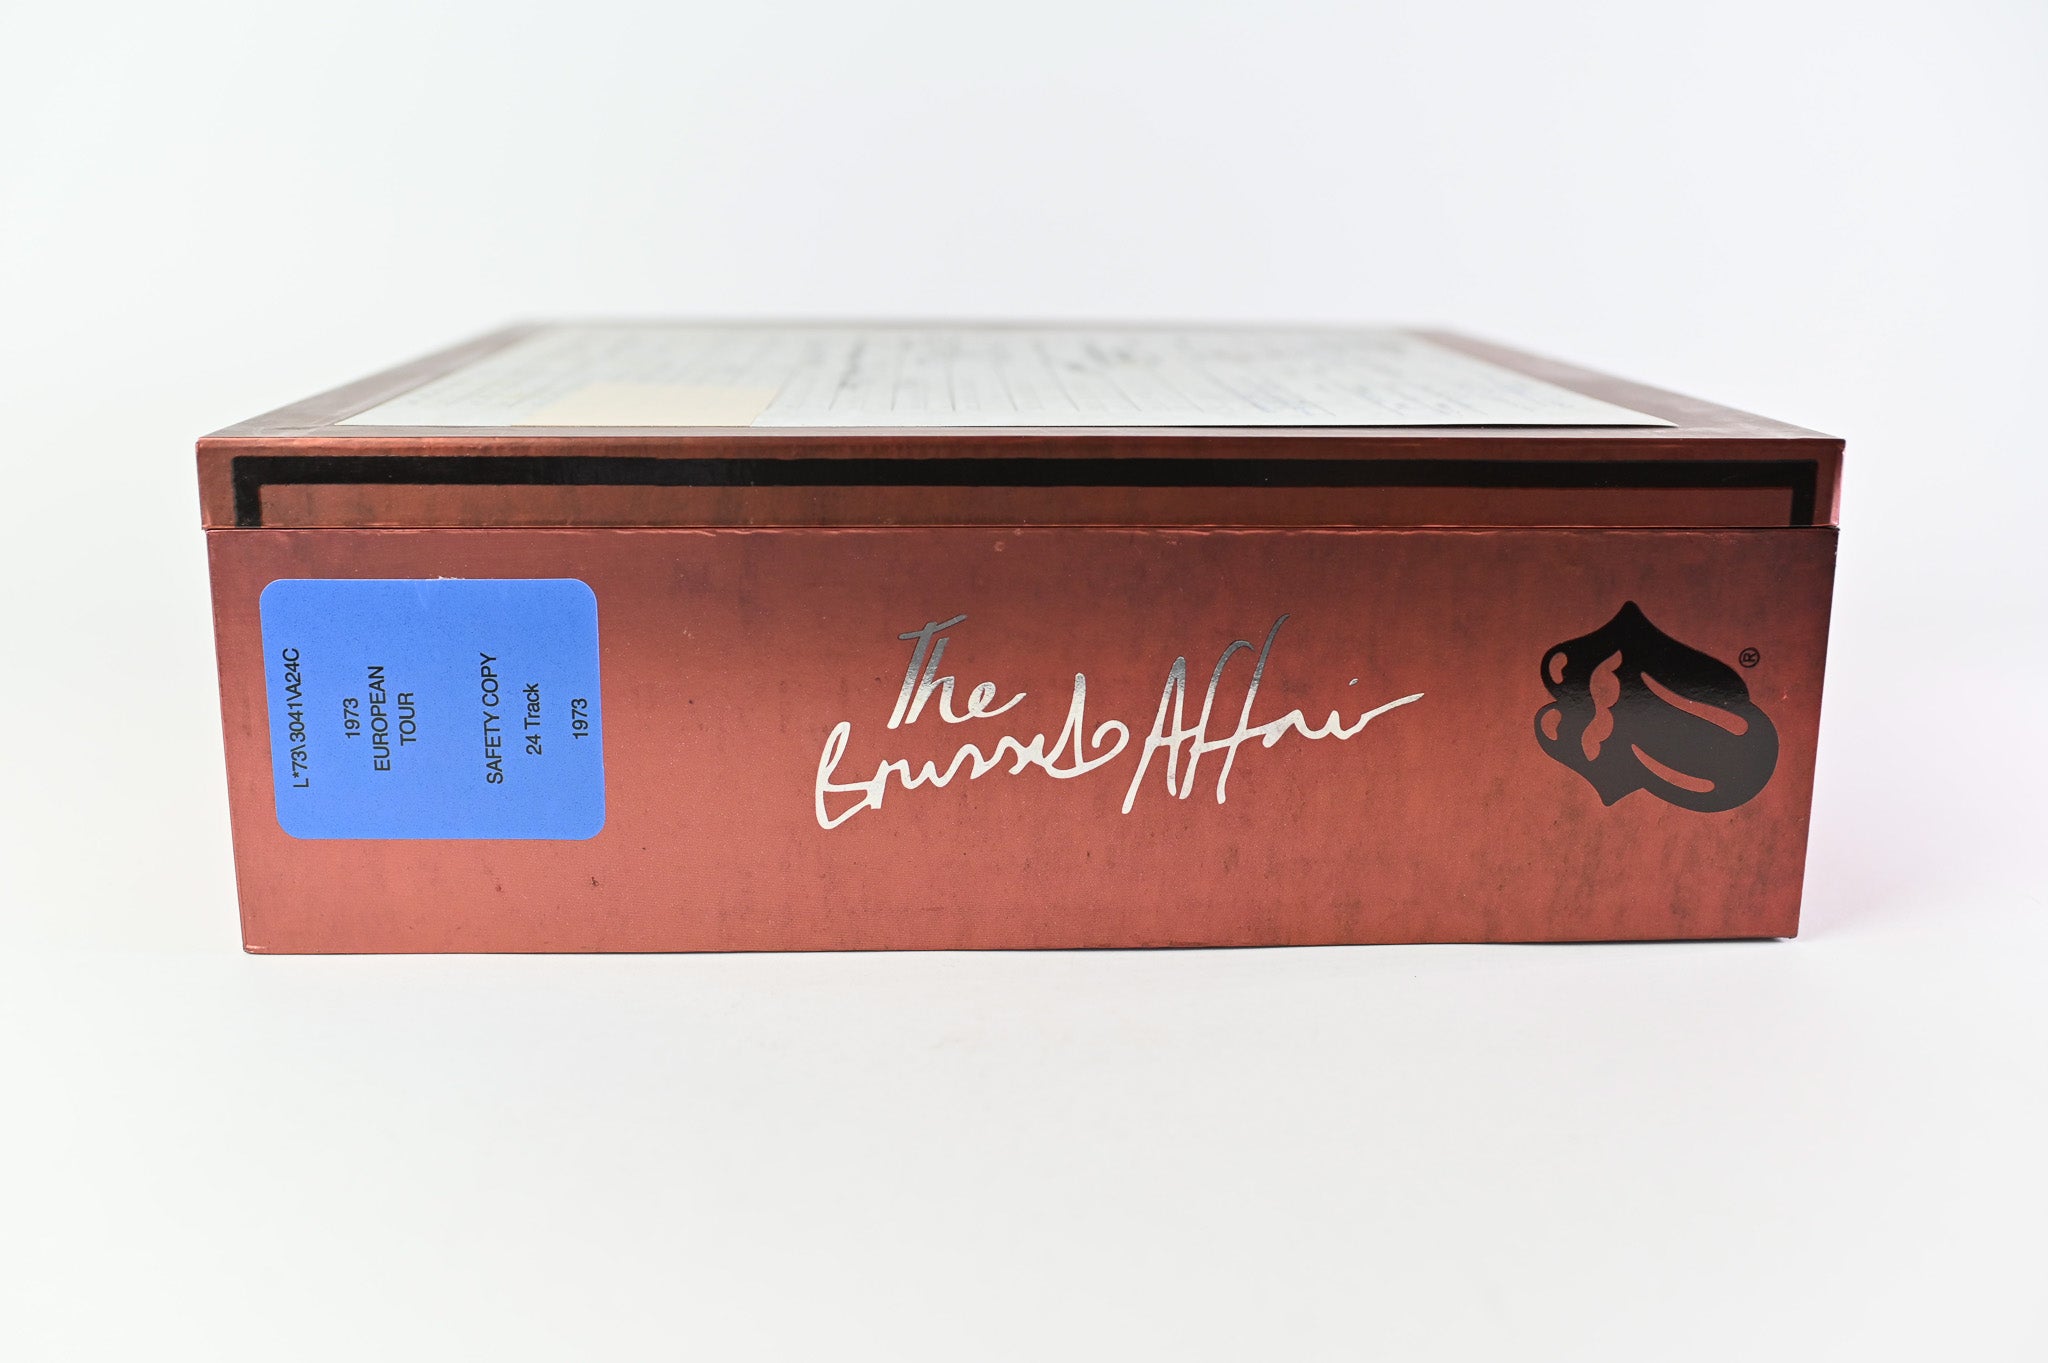 The Rolling Stones - The Brussels Affair on Rolling Stones Archive - Collector's Edition Box Set